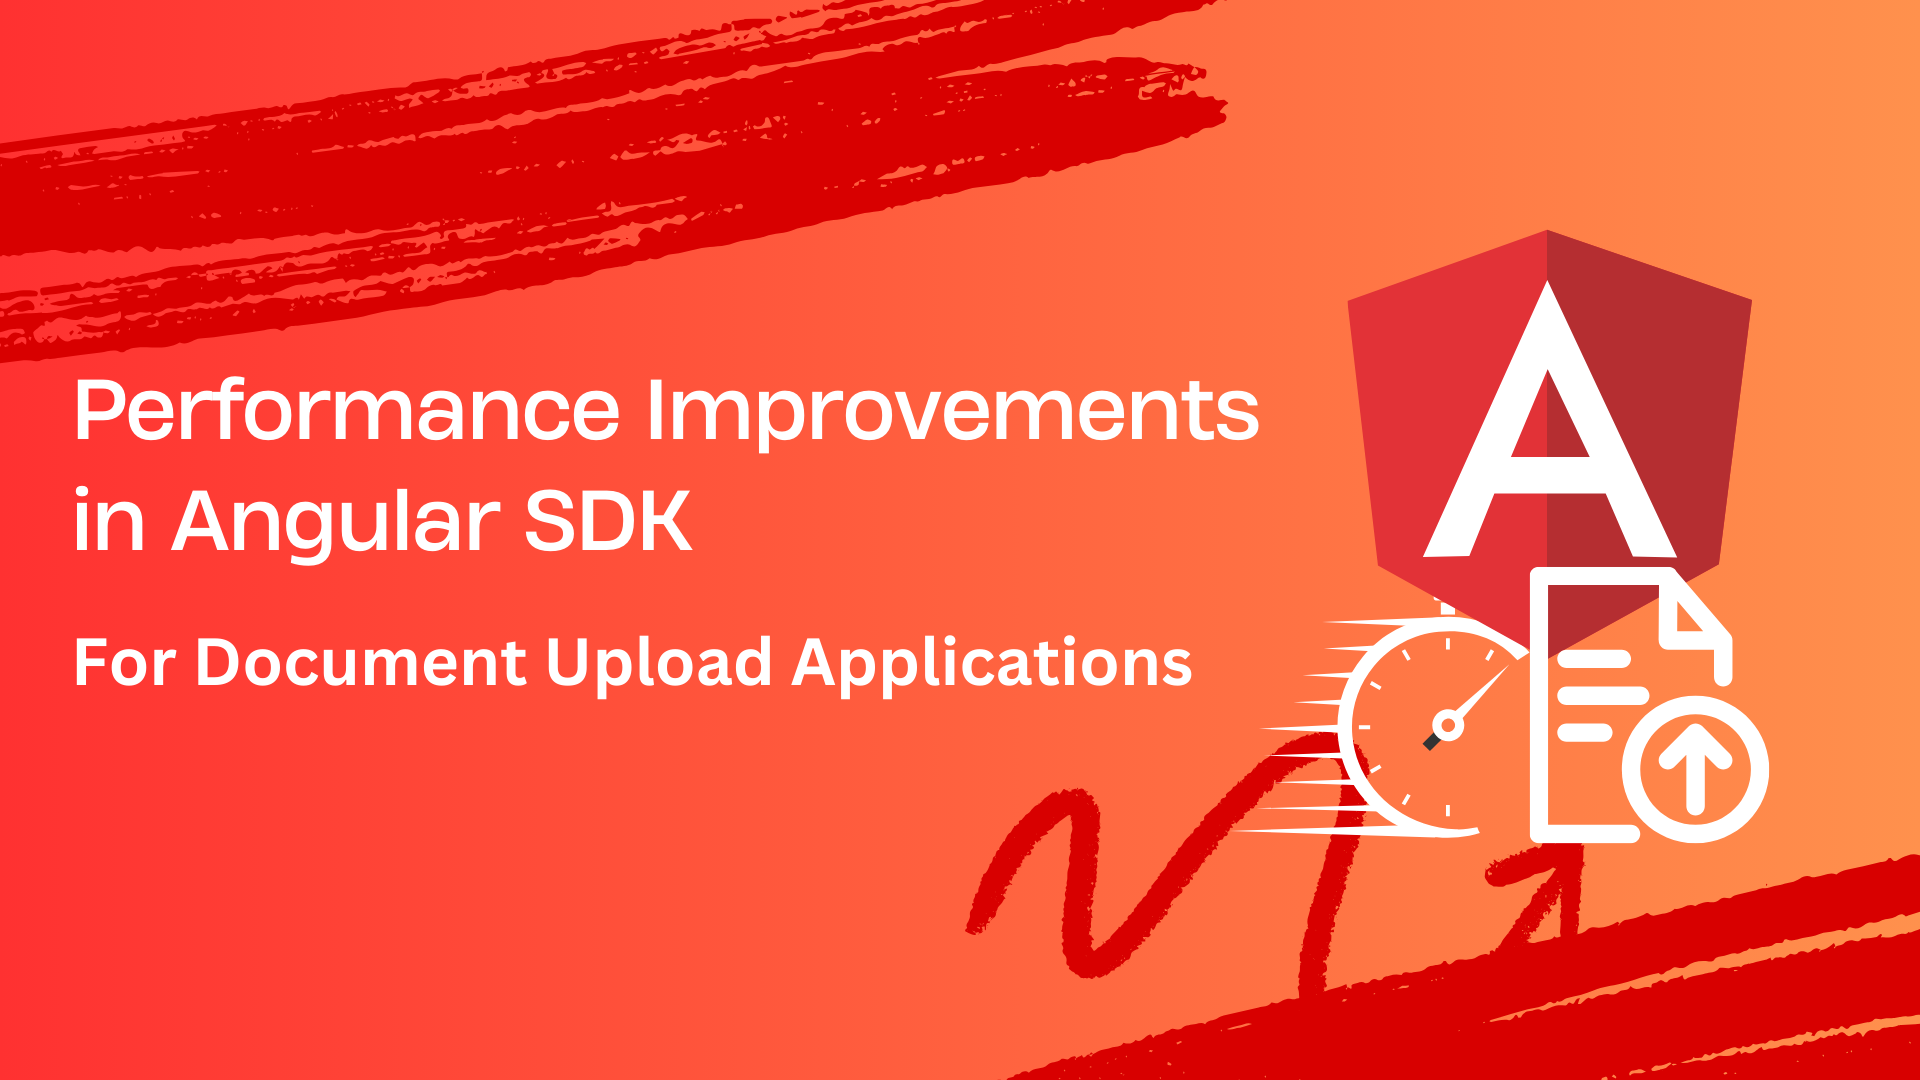 Exploring Performance Improvements in Angular SDK for Document Upload Applications